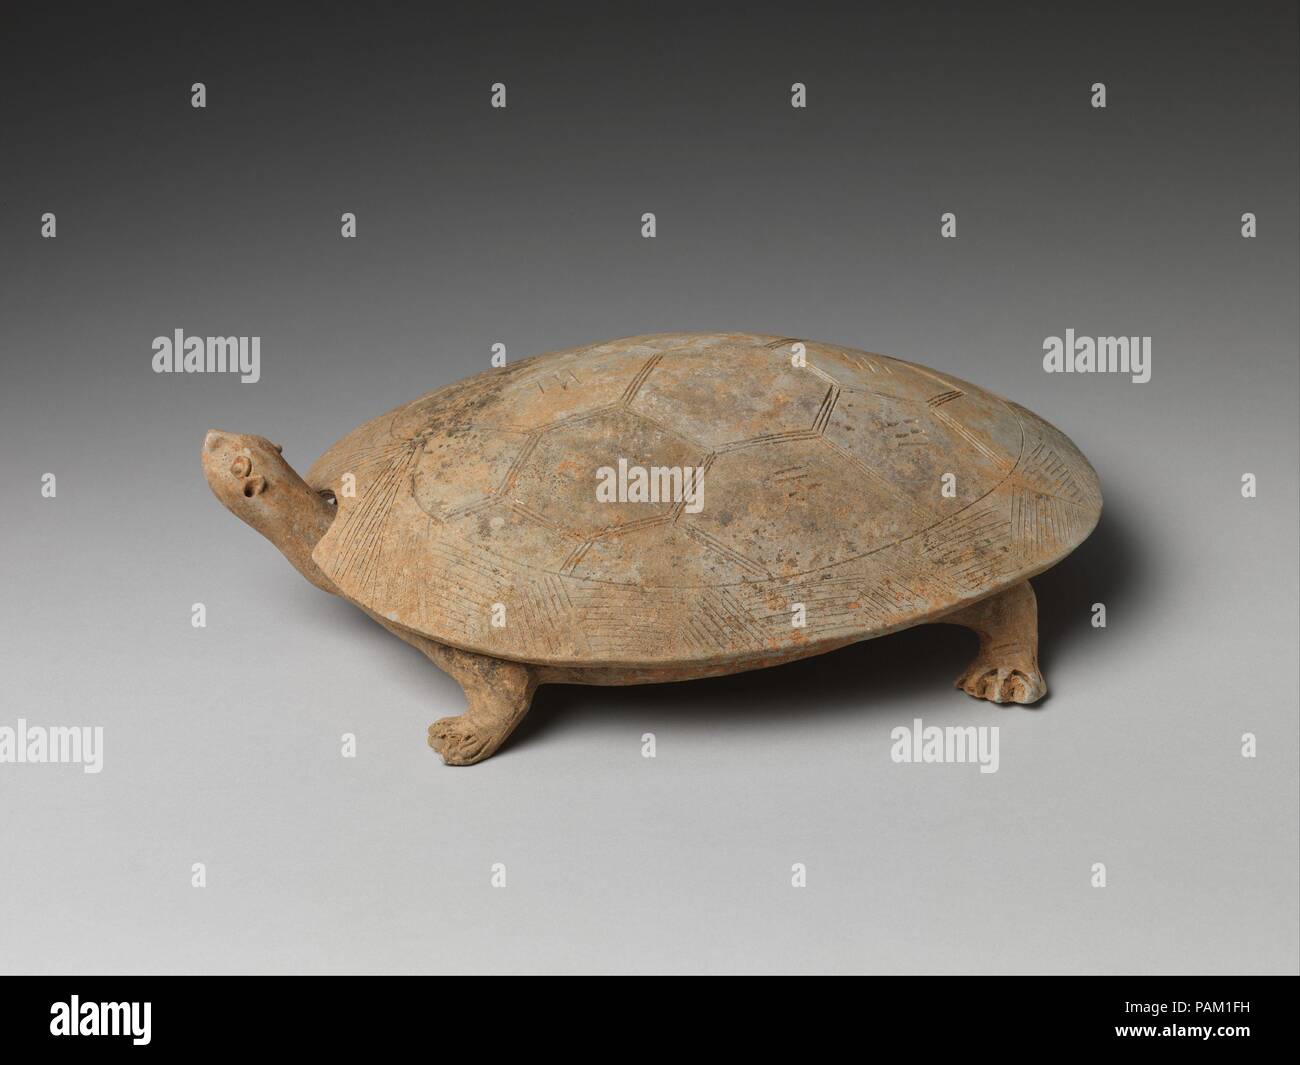 'Inkstone' and Cover in the Shape of a Turtle. Culture: China. Dimensions: H. 3 1/2  in. (8.9 cm);  W. 9 1/4  in. (23.5 cm); L. 11 5/8 in. (29.5 cm). Date: ca. 6th-7th century.  Turtles and tortoises, symbols of longevity and endurance, have long been associated with divination in ancient China. Here, the shell is engraved with the eight trigrams (bagua) used in Daoist cosmology, which became increasingly important during the Sui and Tang dynasties. Museum: Metropolitan Museum of Art, New York, USA. Stock Photo